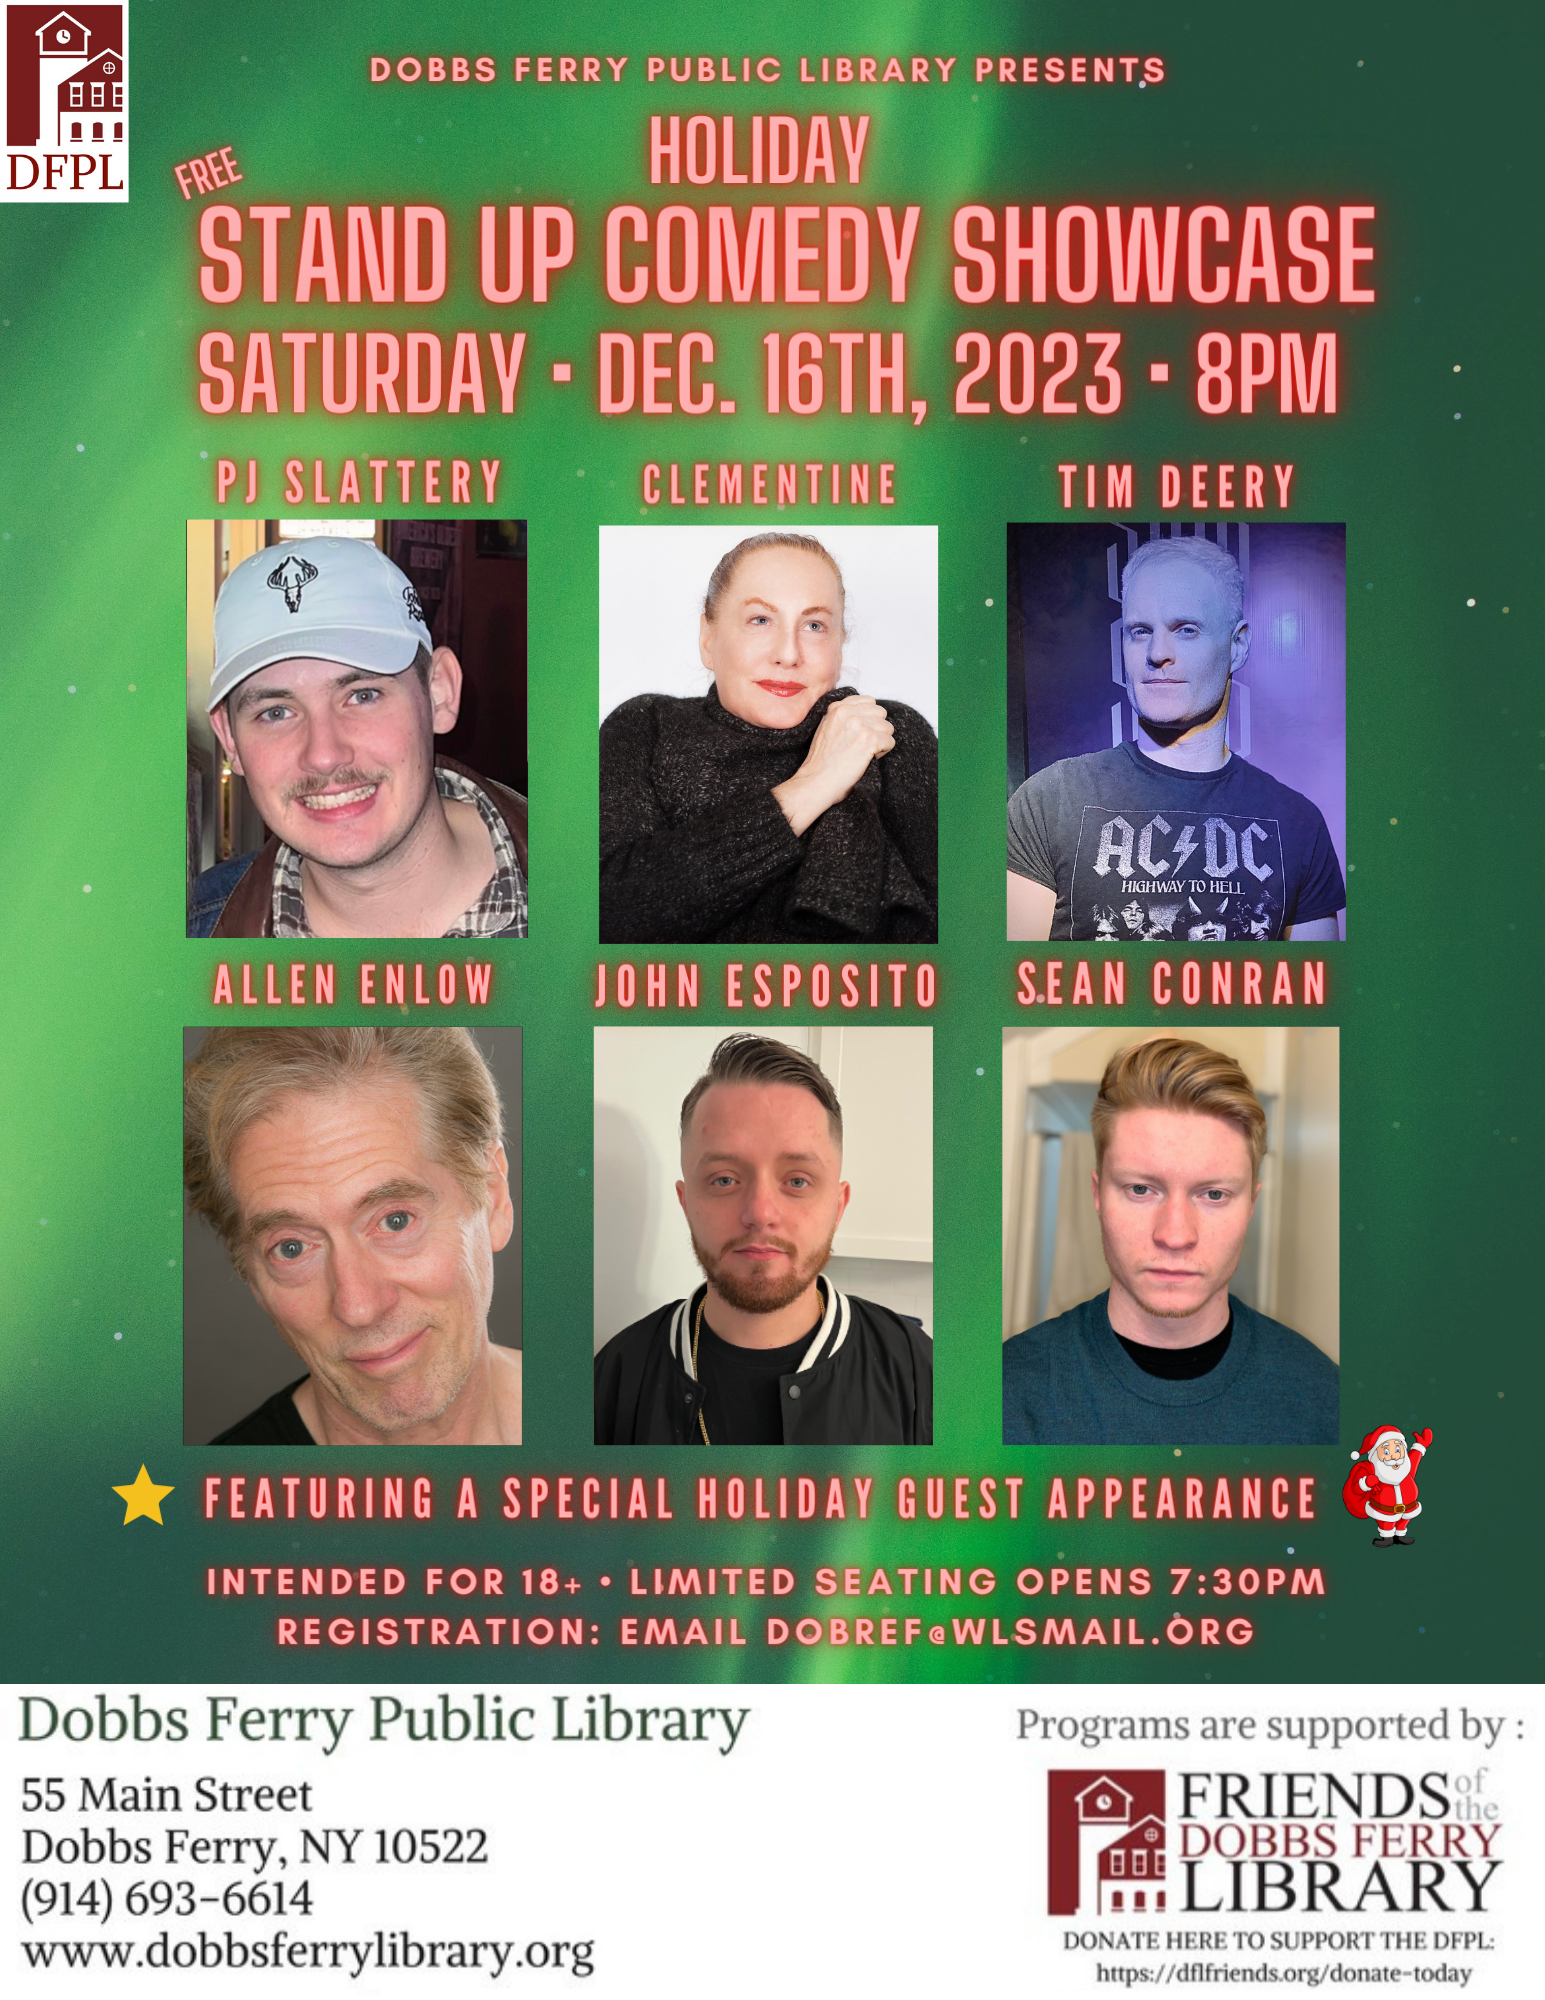 Holiday Stand Up Comedy Showcase at DFPL (FREE)